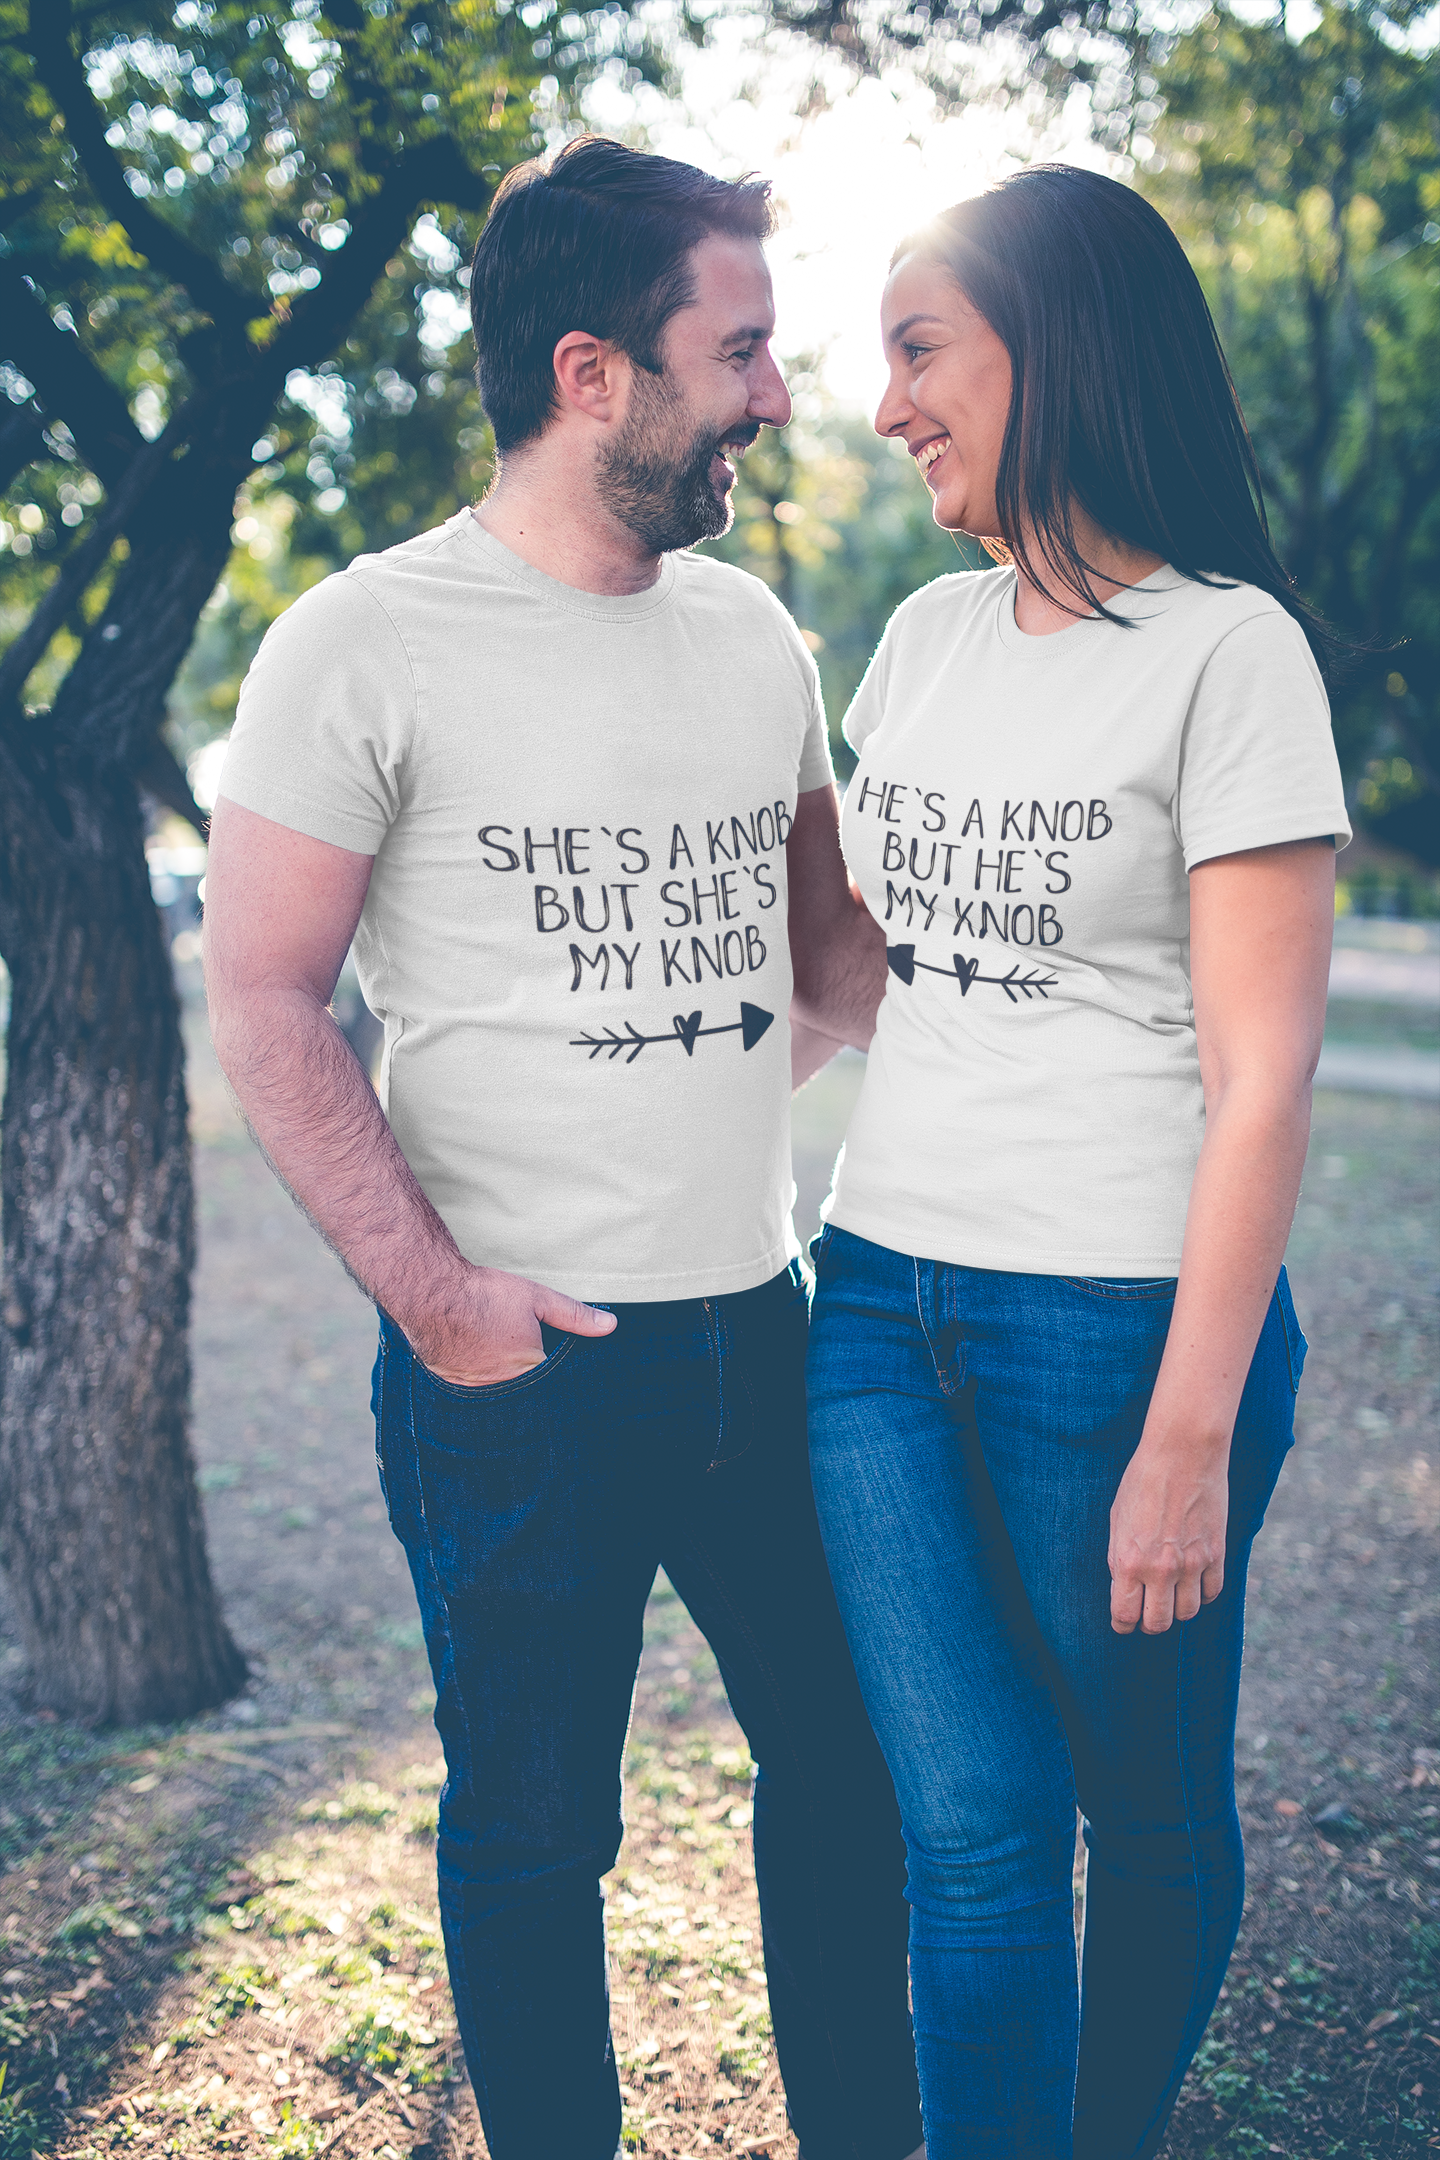 A man & woman wearing white matching t-shirts with the funny quotes 'he's a knob but he's my knob' and 'she's a knob but she's my knob'. Printed in black ink.